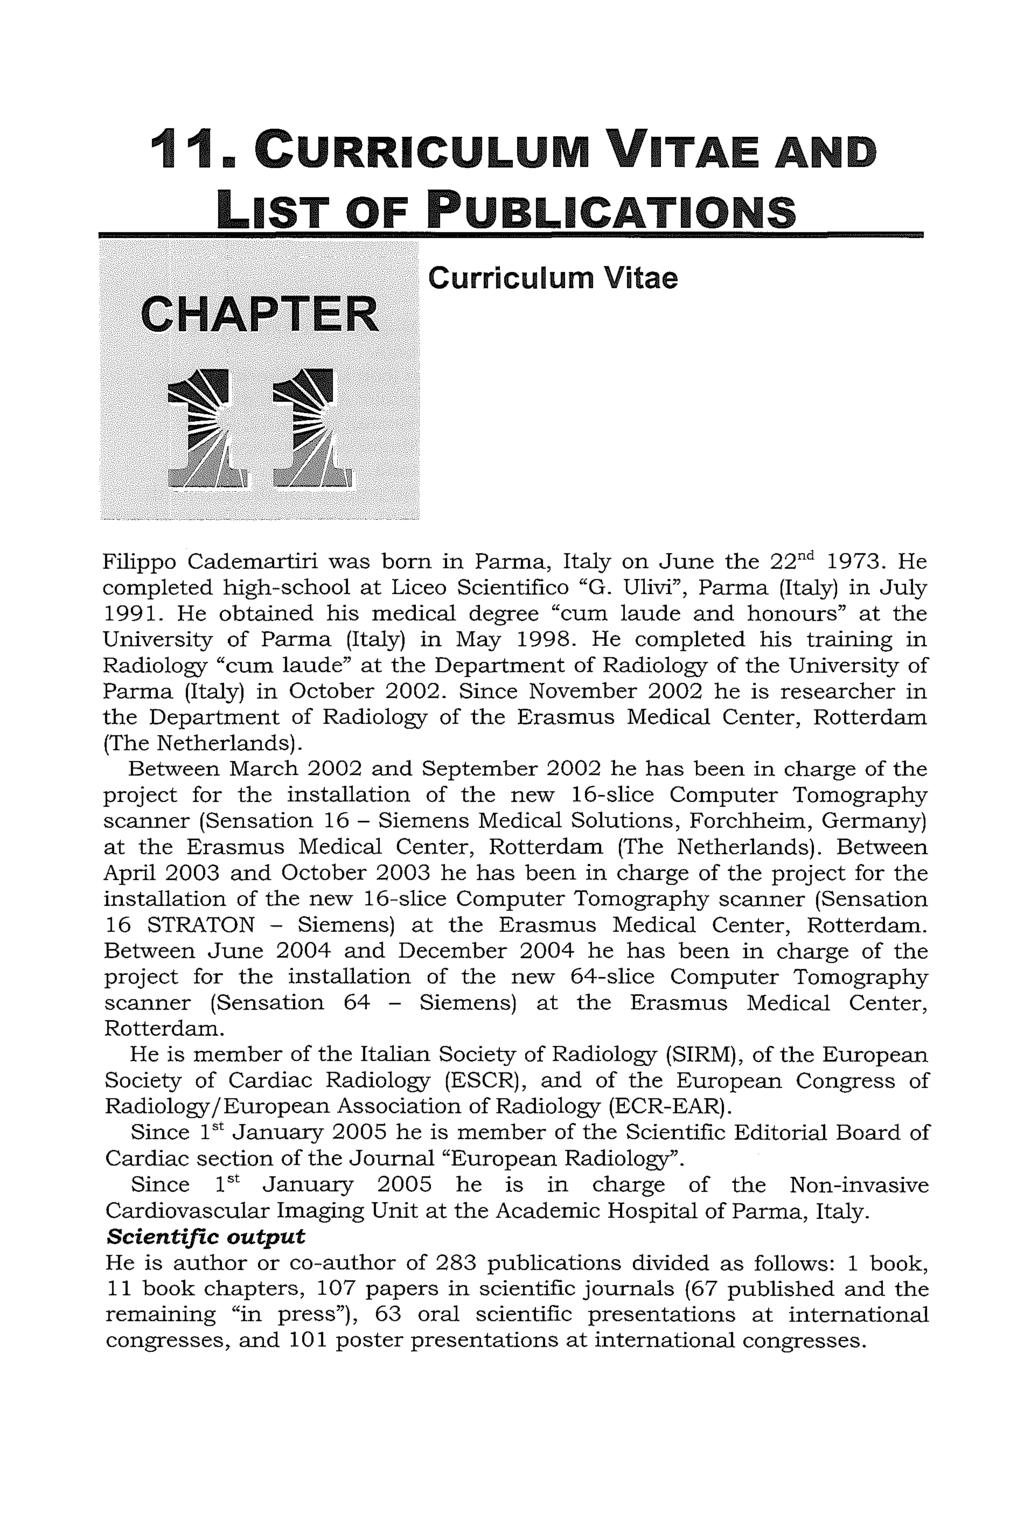 11. CURRICULUM ITAE AND LIST OF PUBLICATIONS CHAPTER Curriculum Vitae Filippo Cademartiri was born in Parma, Italy on June the 22nd 1973. He completed high-school at Licea Scientifico "G.